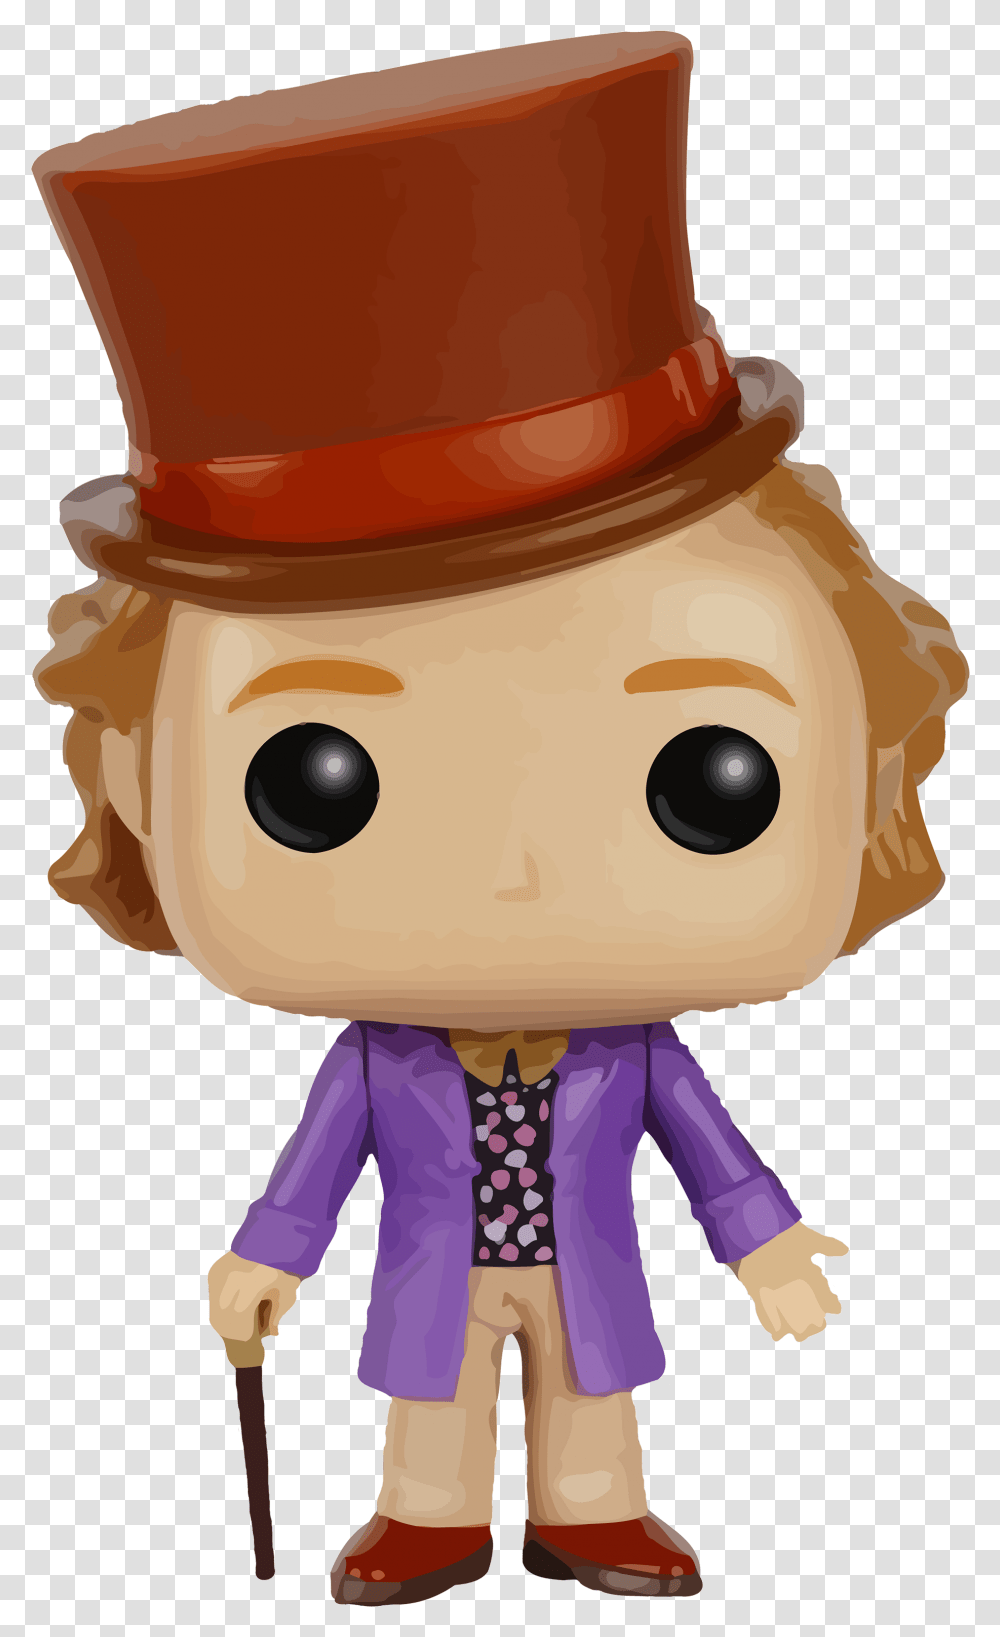 Willy Wonka Charlie And The Chocolate Factory Violet Funko Pop Willy Wonka, Doll, Toy, Figurine, Wedding Cake Transparent Png